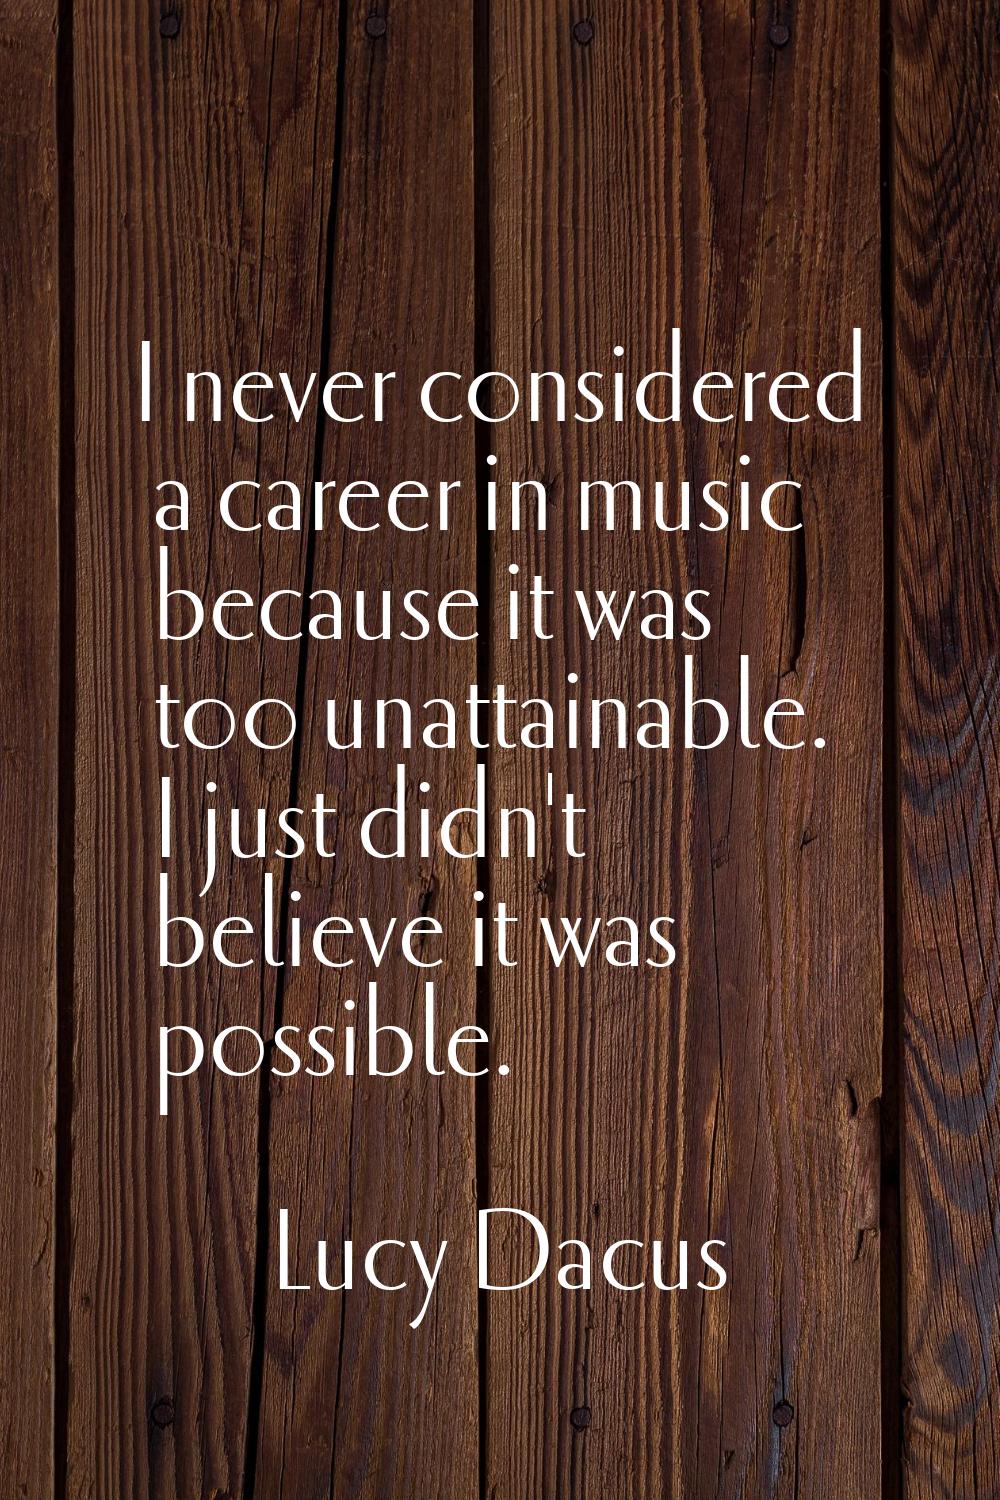 I never considered a career in music because it was too unattainable. I just didn't believe it was 